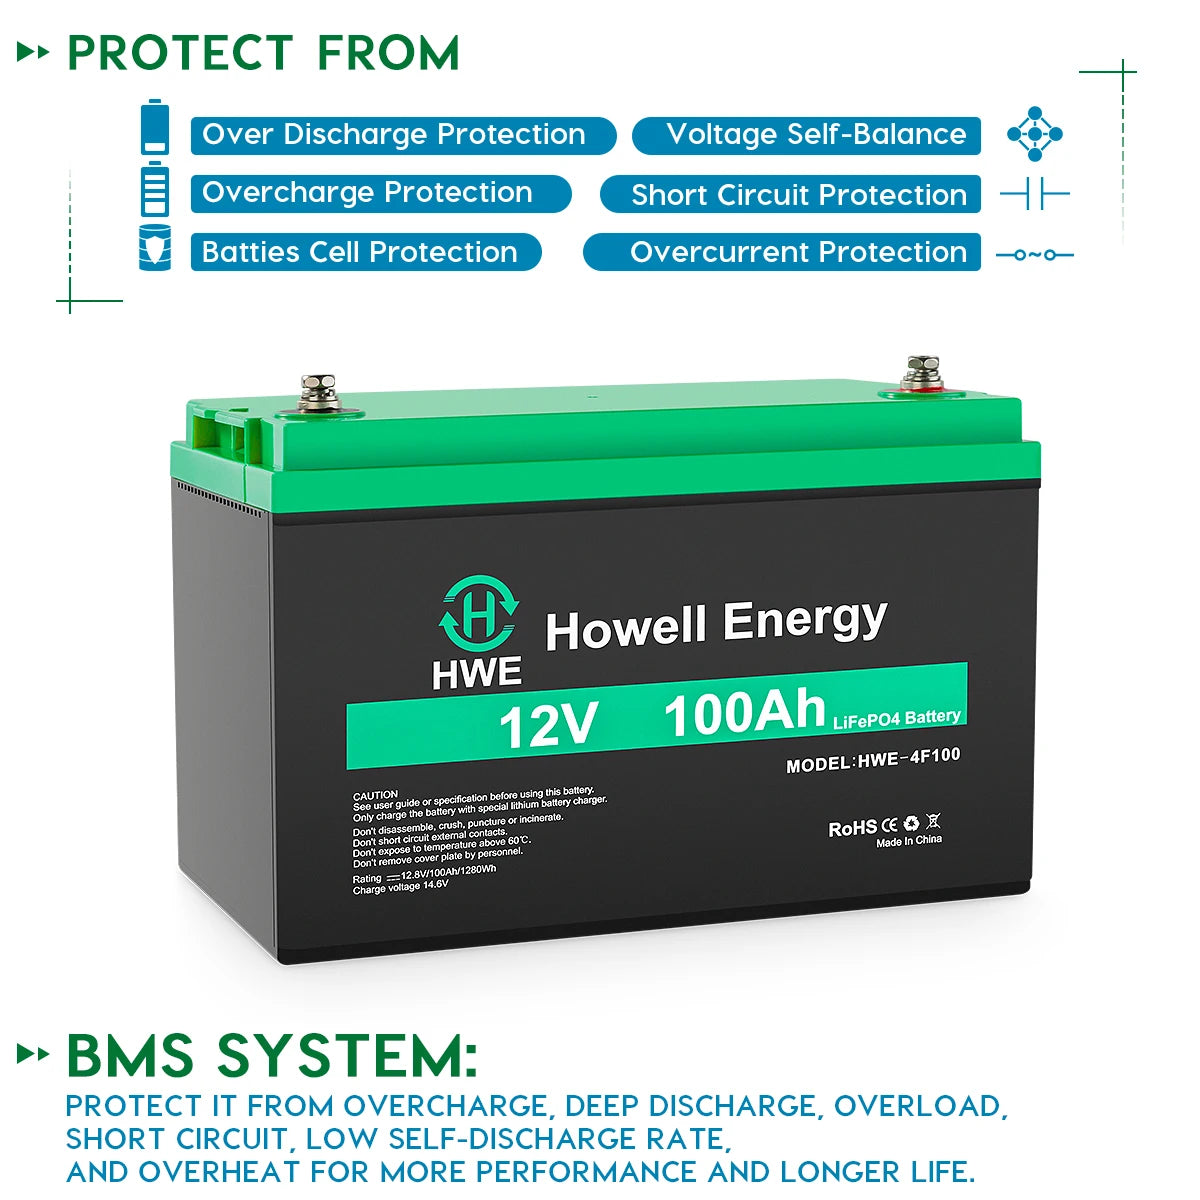 Howell 12v 100ah Battery, Protect Howell Energy's 12V LiFePO4 battery from improper use; follow special instructions for charging and avoid disassembly.